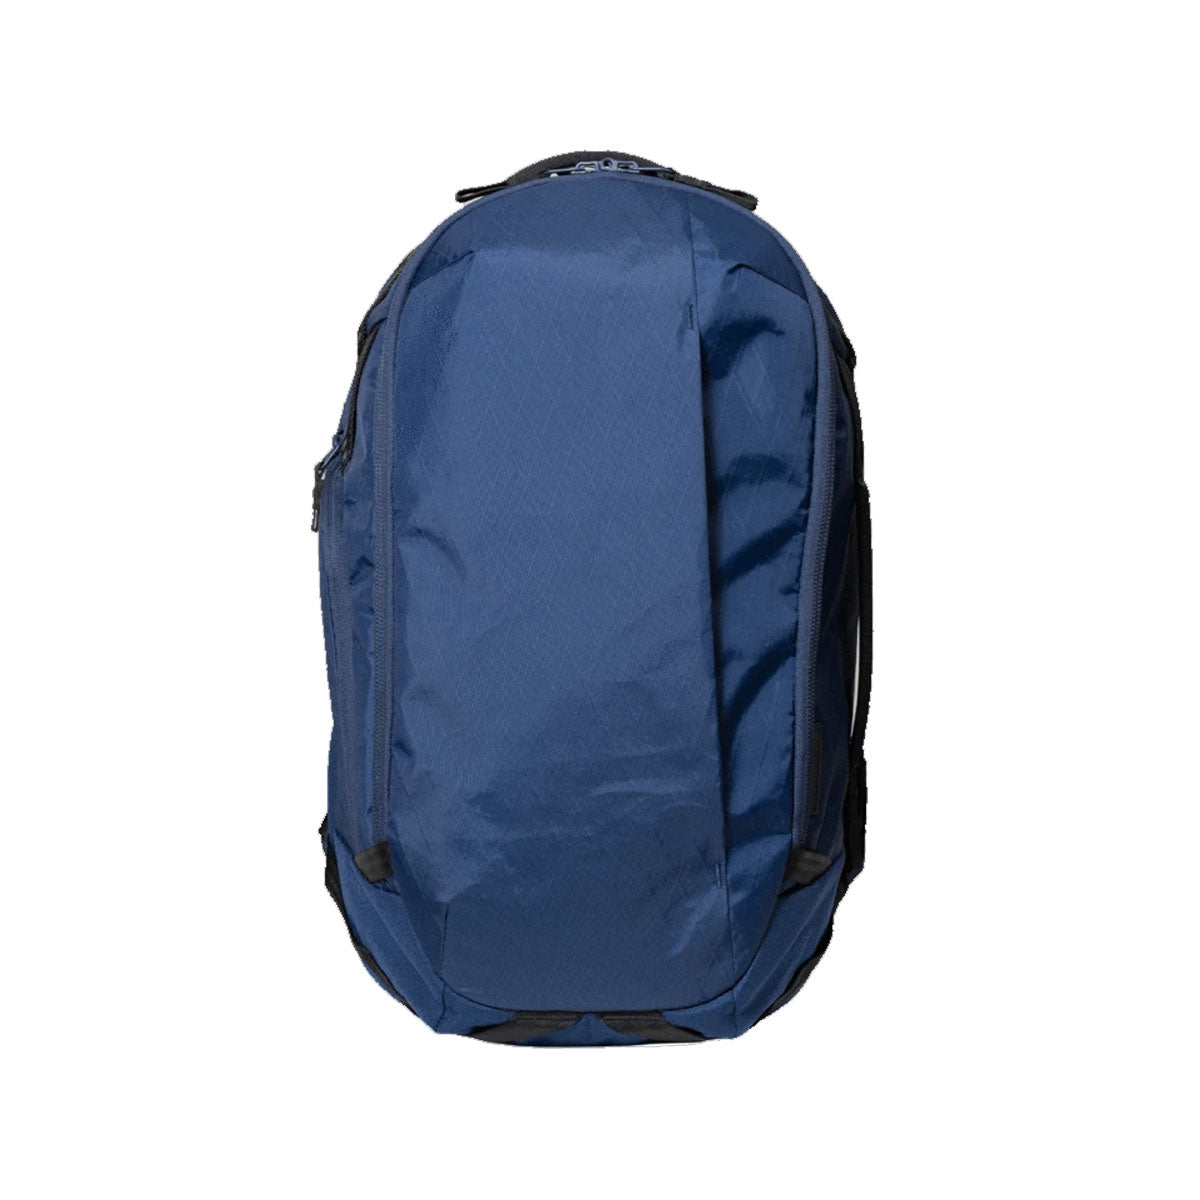 Able Carry : Max Backpack : Ocean Blue